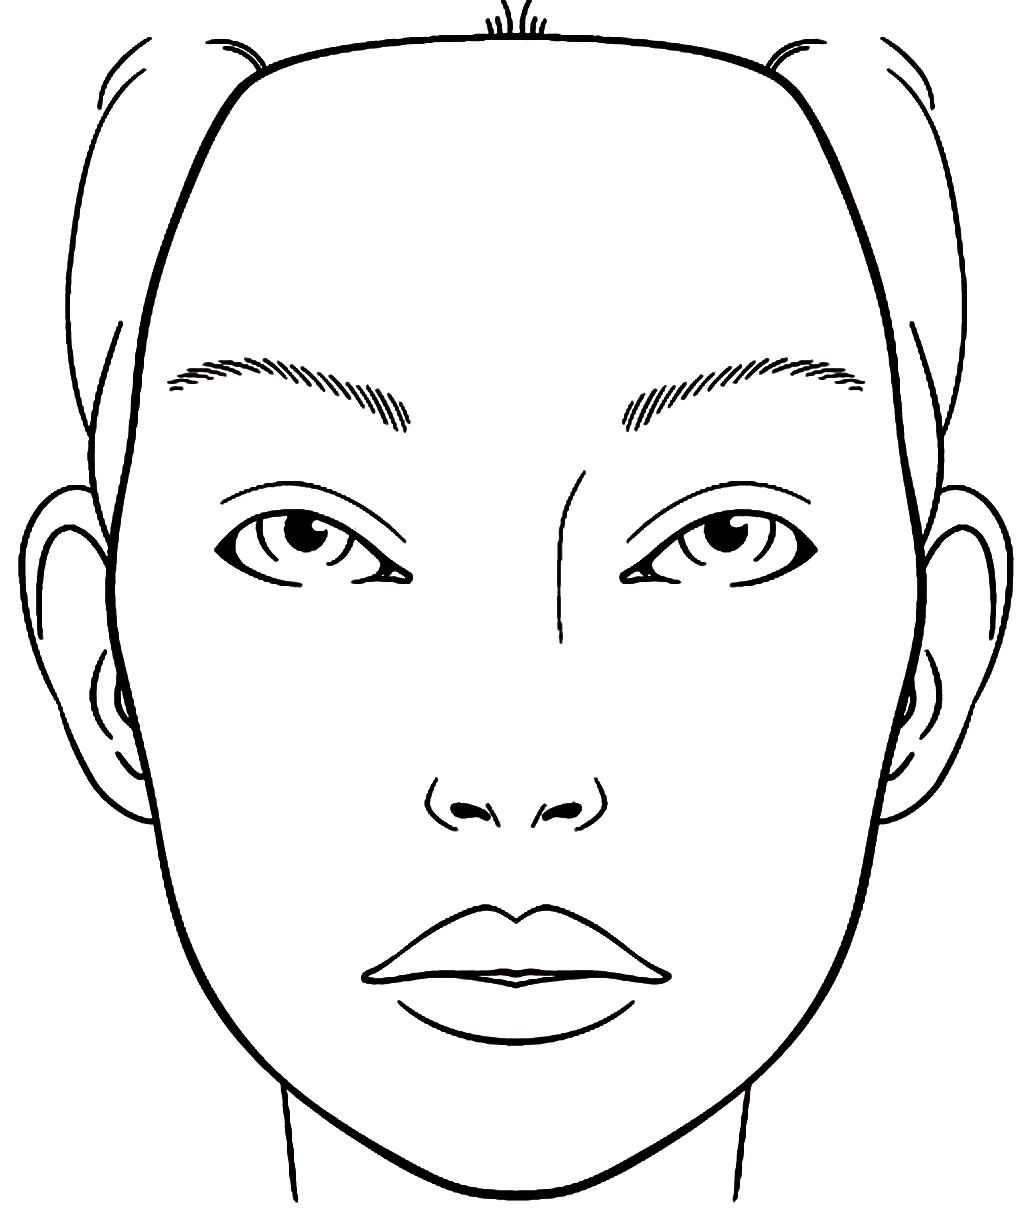 Blank Face Sketch - Clipart library